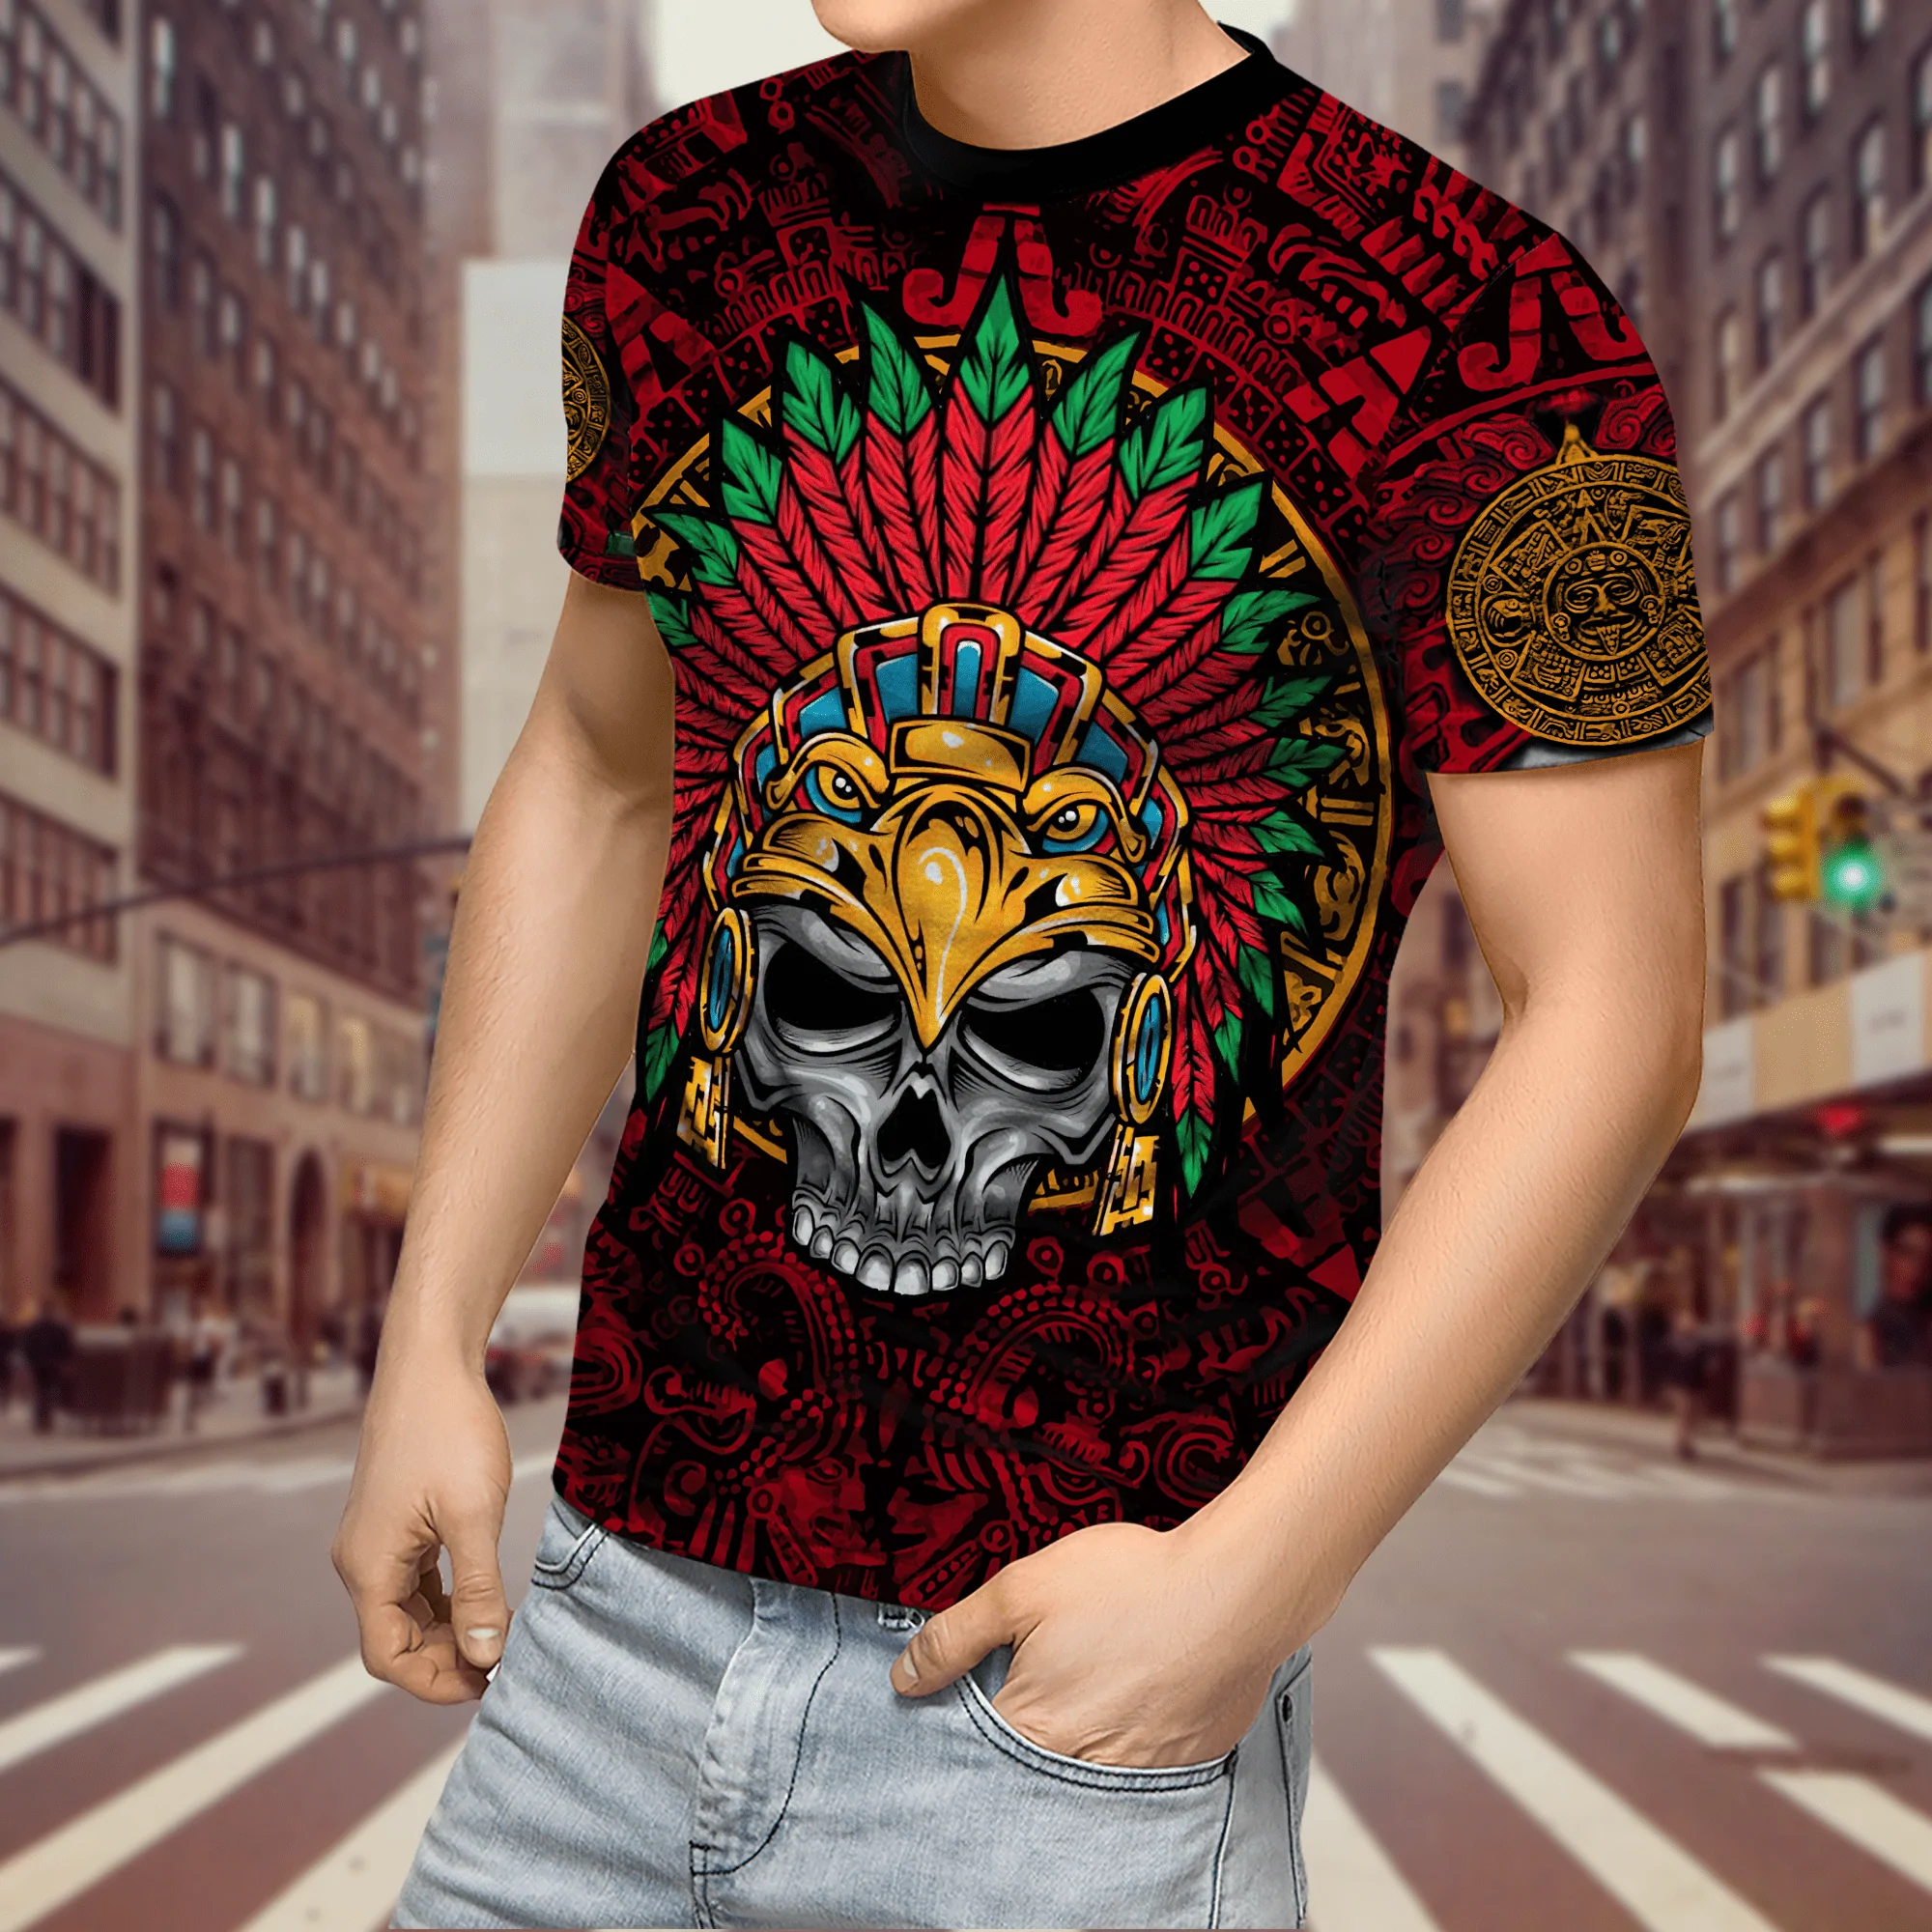 Aztec Eagle Warrior Skull 3D All Over Printed Unisex Shirts Coolspod